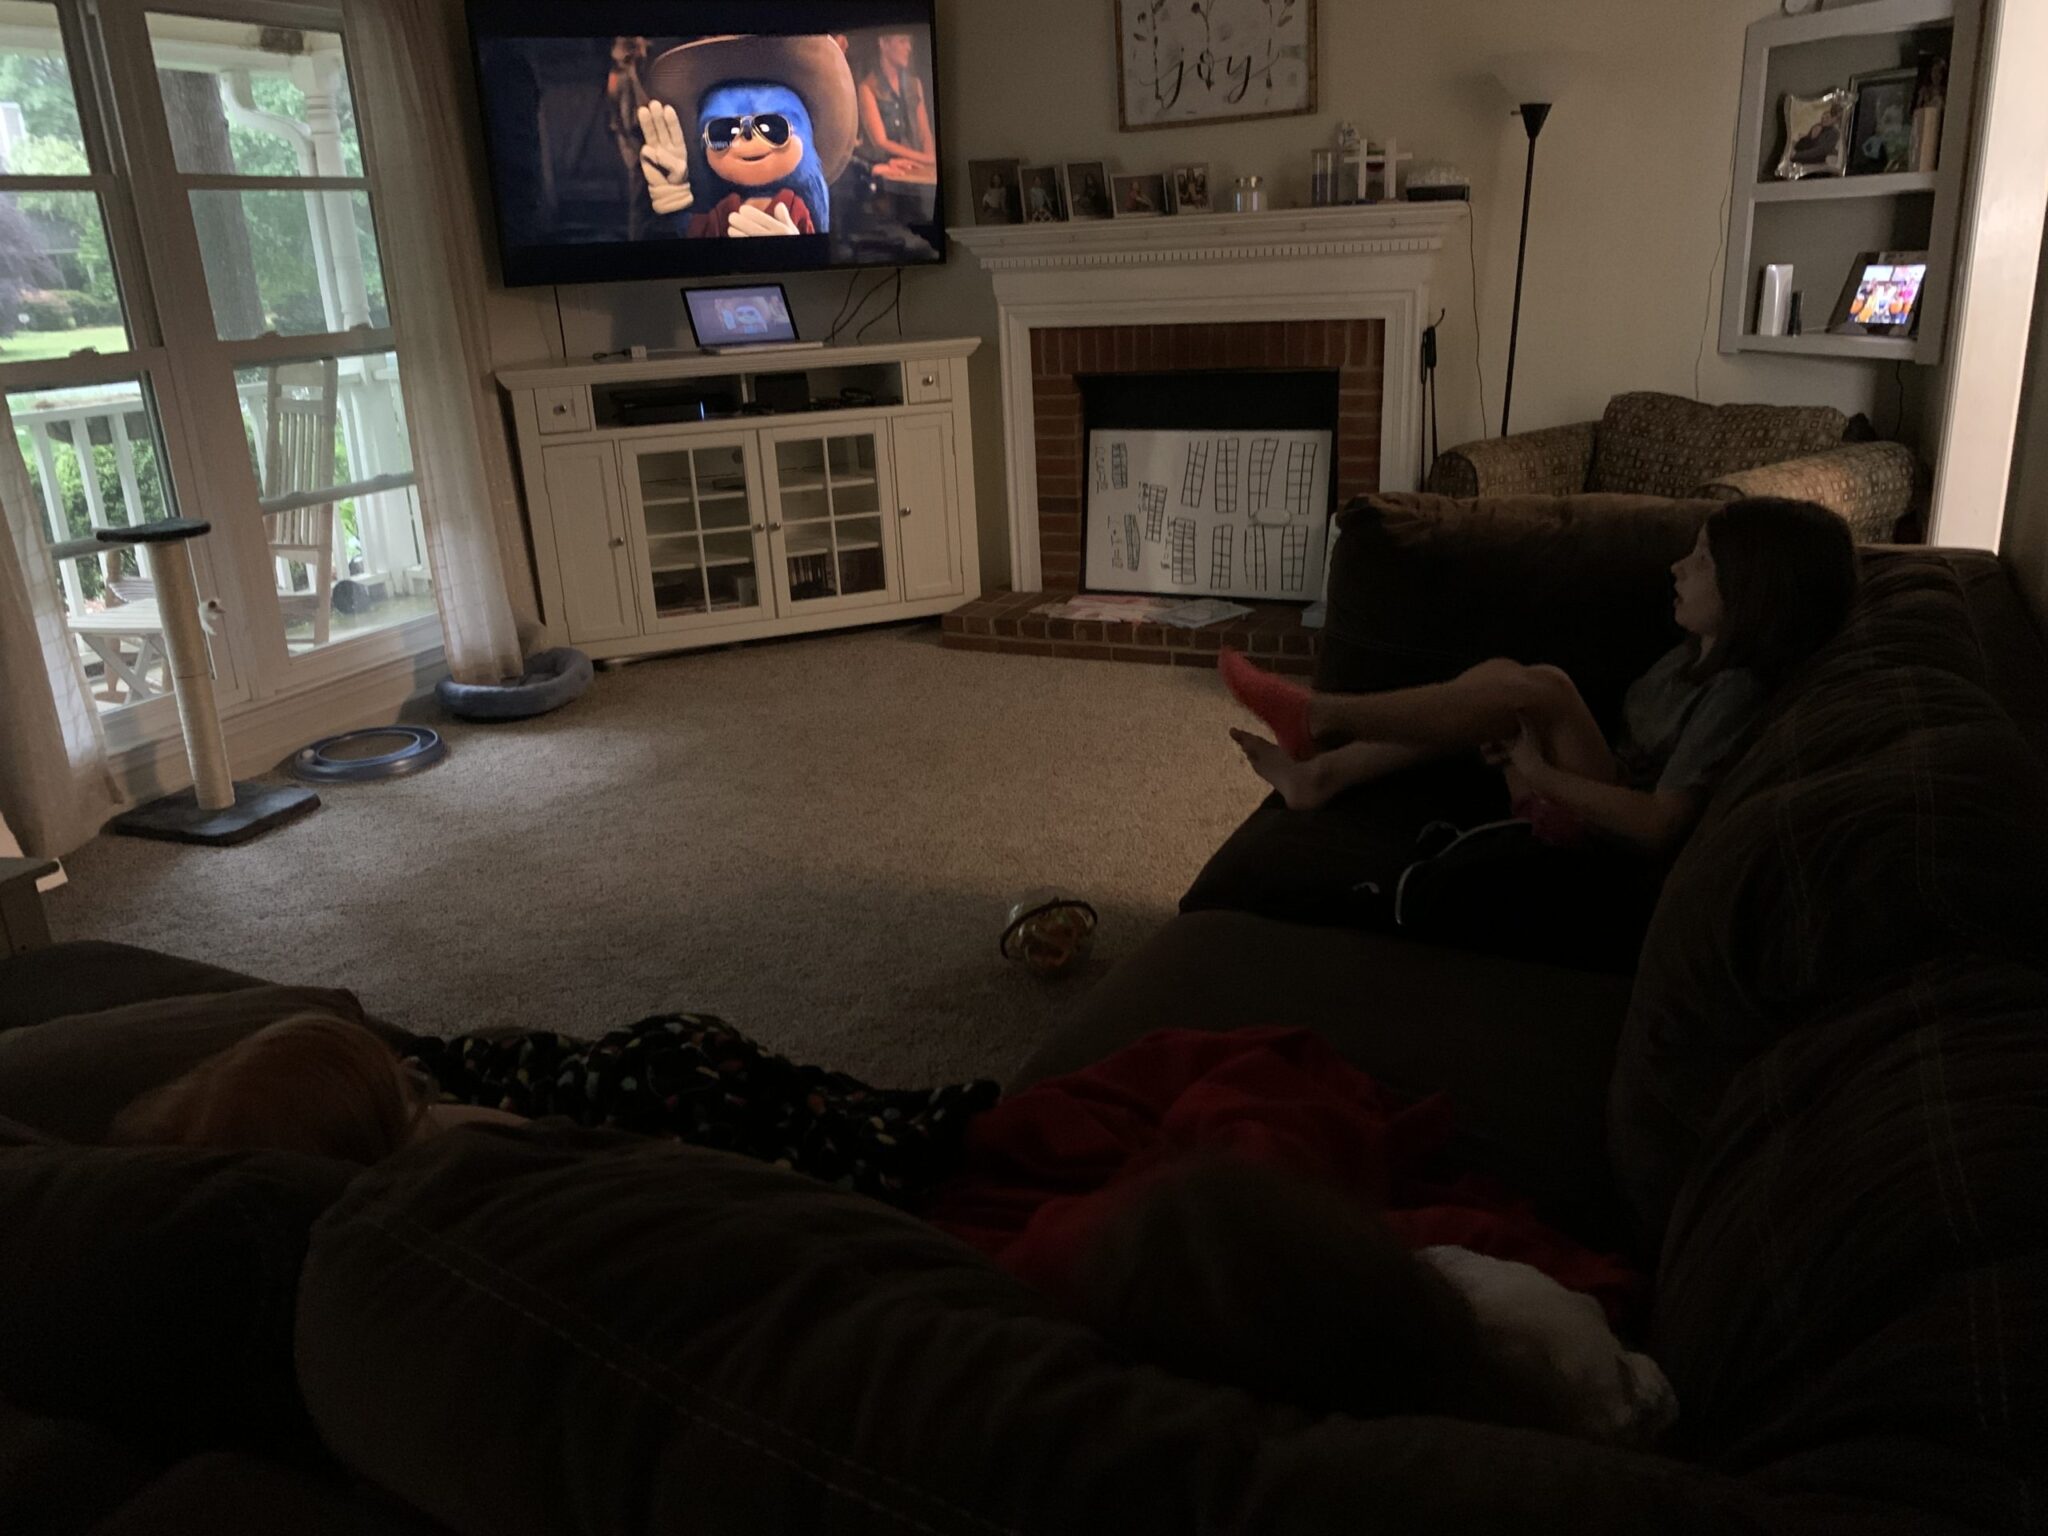 Watching Sonic at home